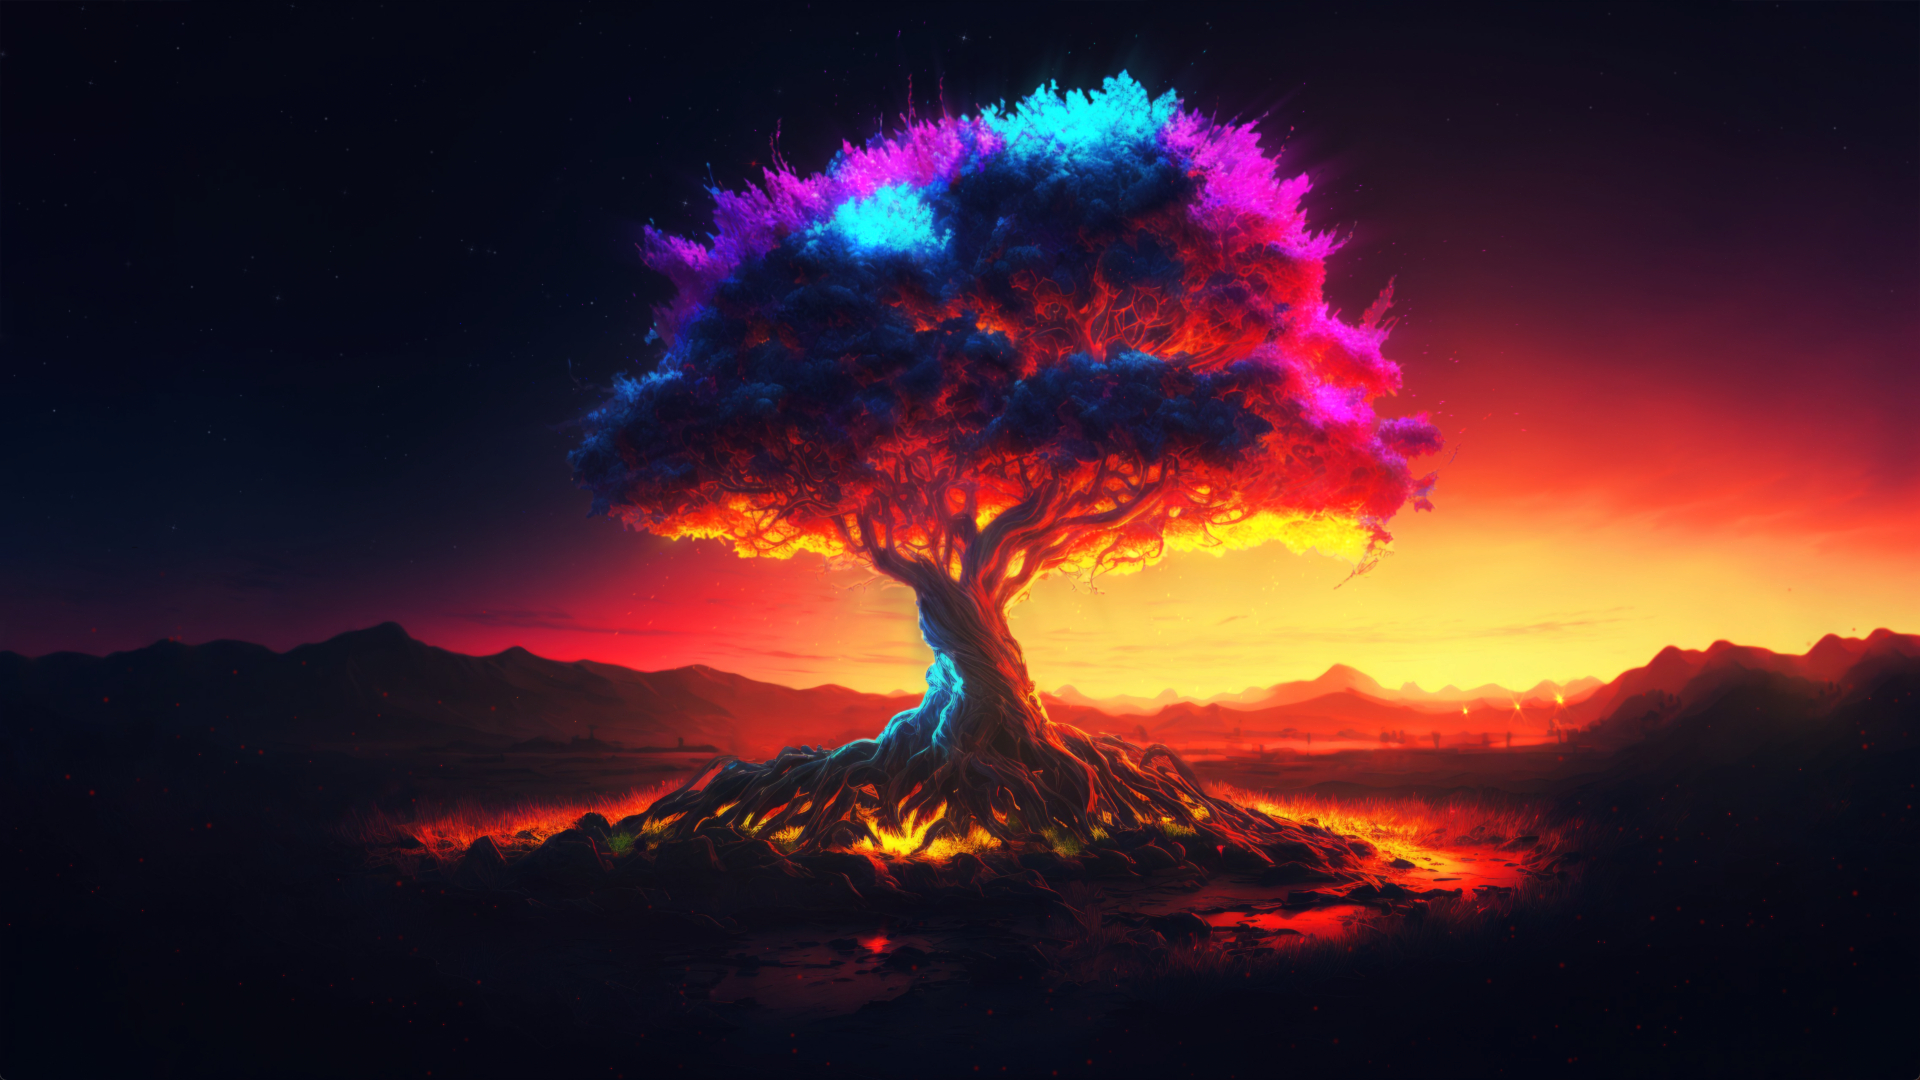 A colorful evening tree